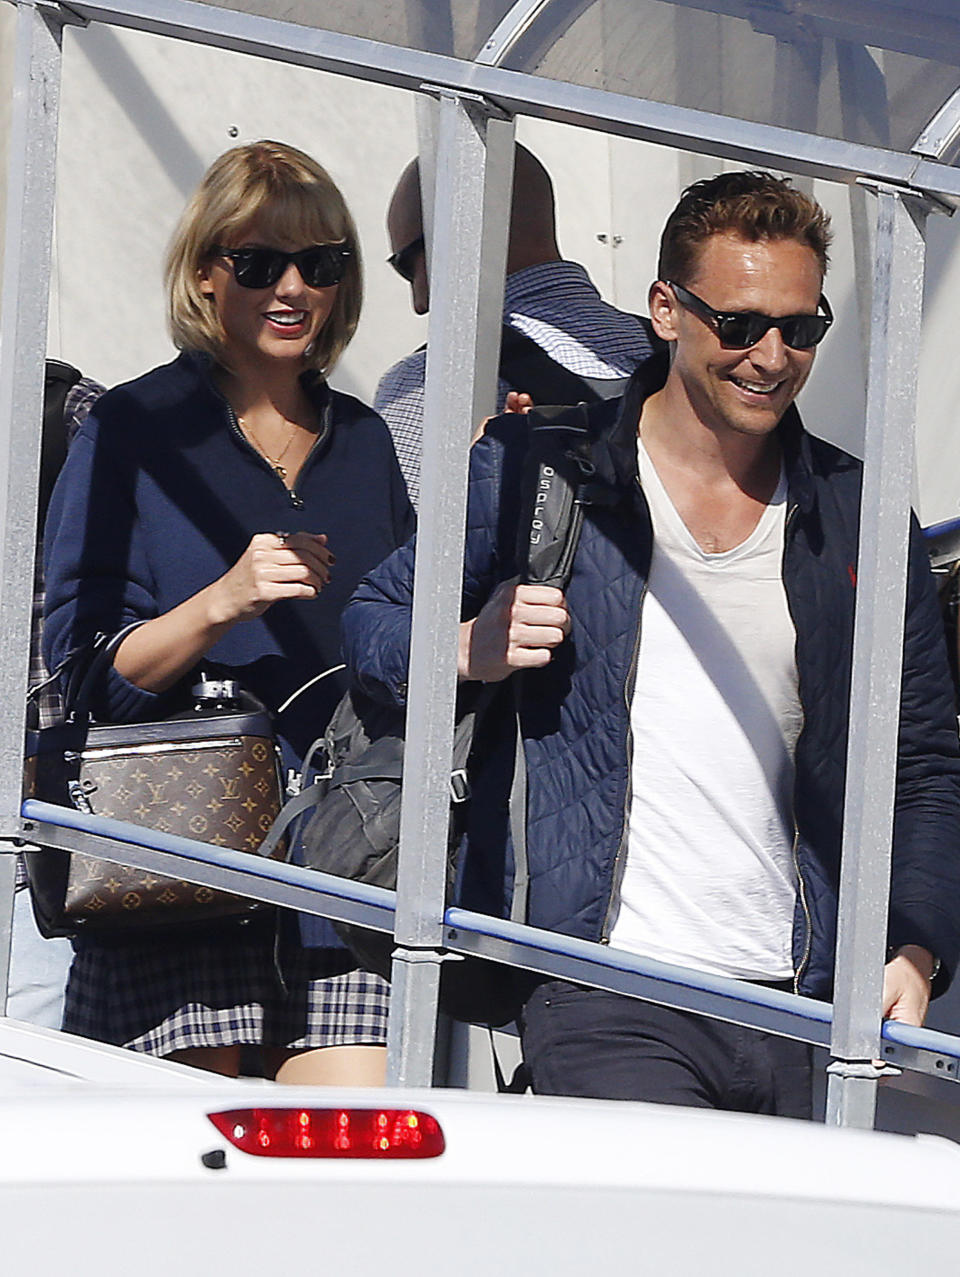 Hiddleswift in full bloom.&nbsp; (Photo: Newspix via Getty Images)